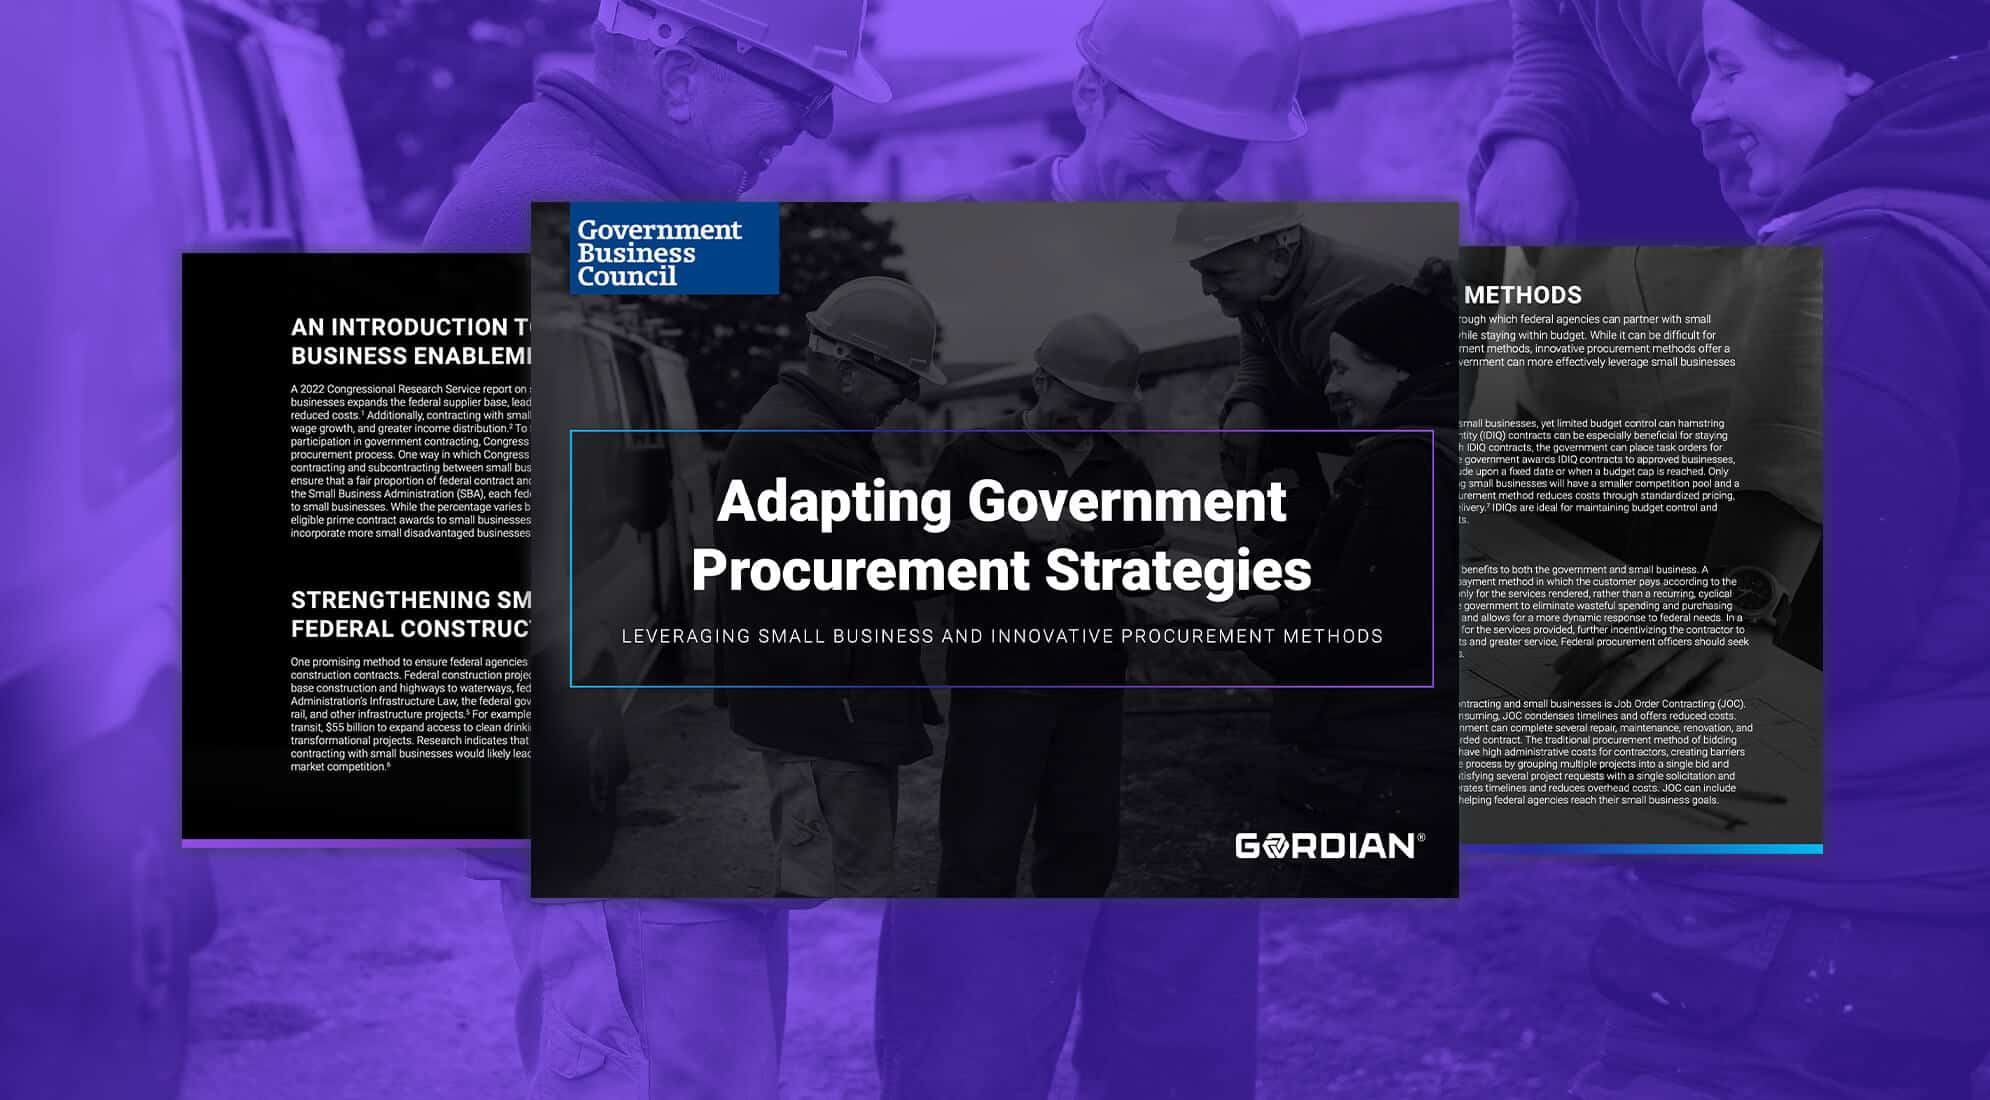 Federal Small Business Enablement through Innovative Procurement Methods 4